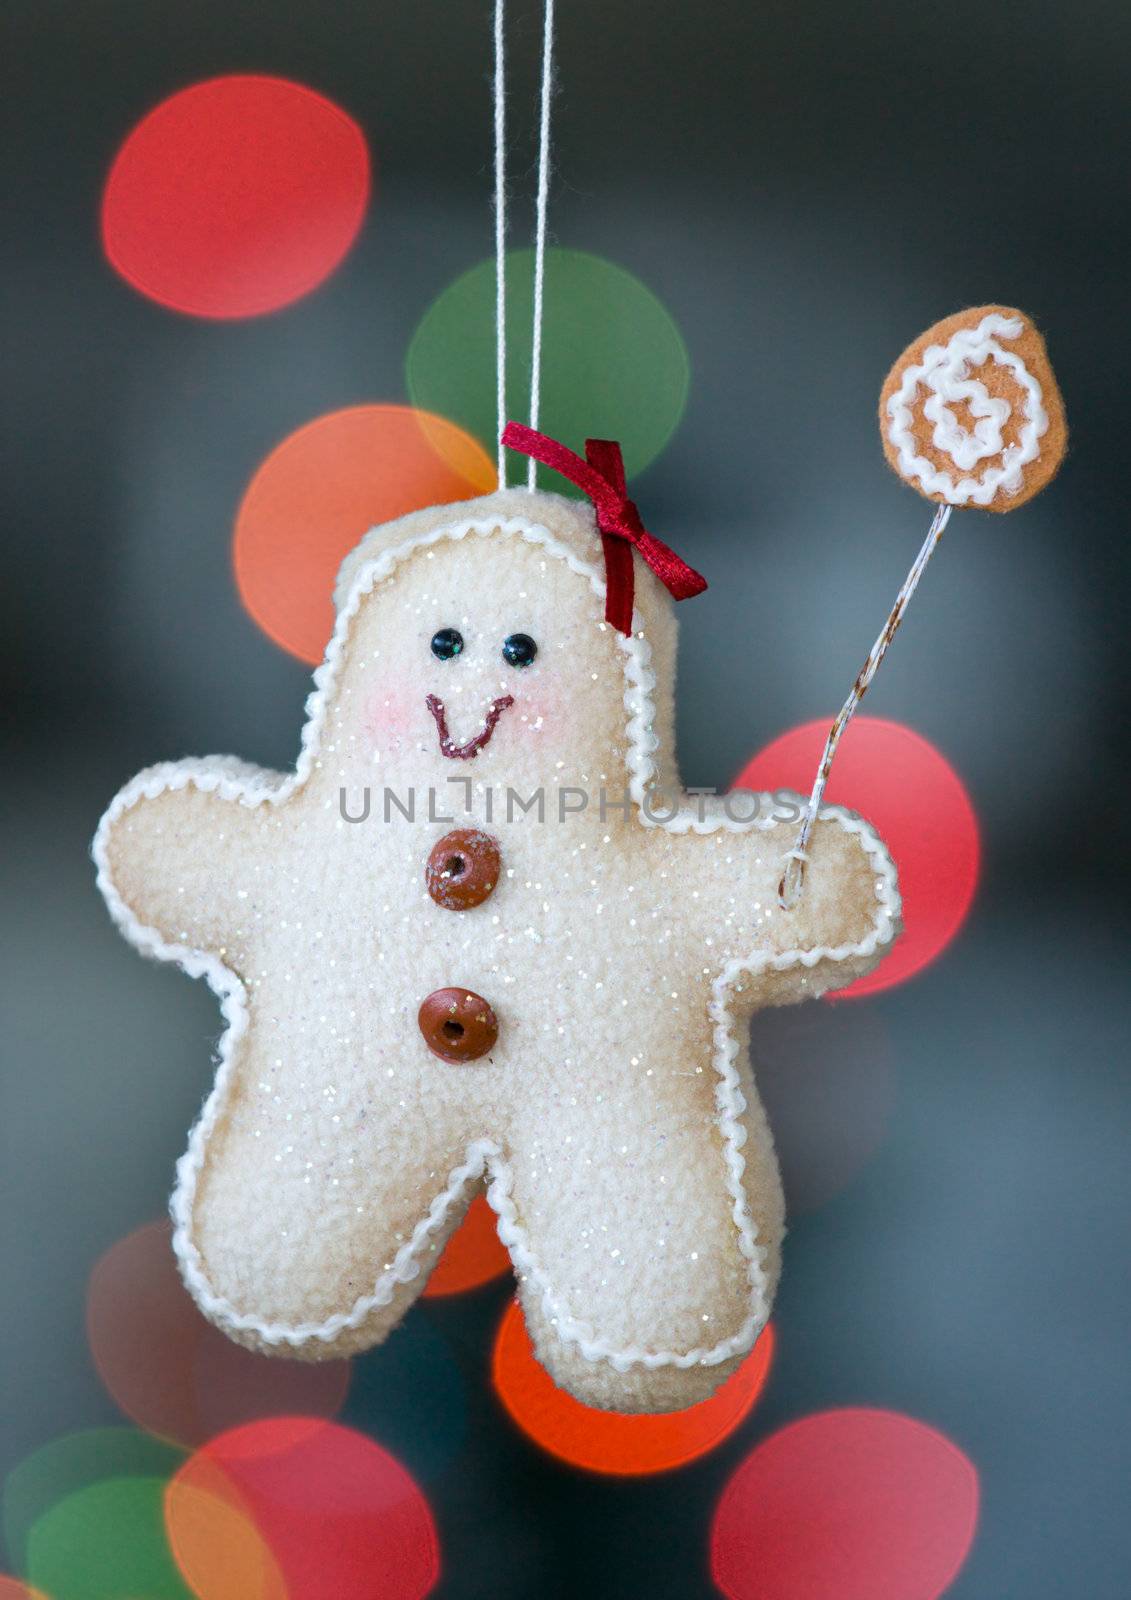 Gingerbread man decoration hangs from a christmas tree